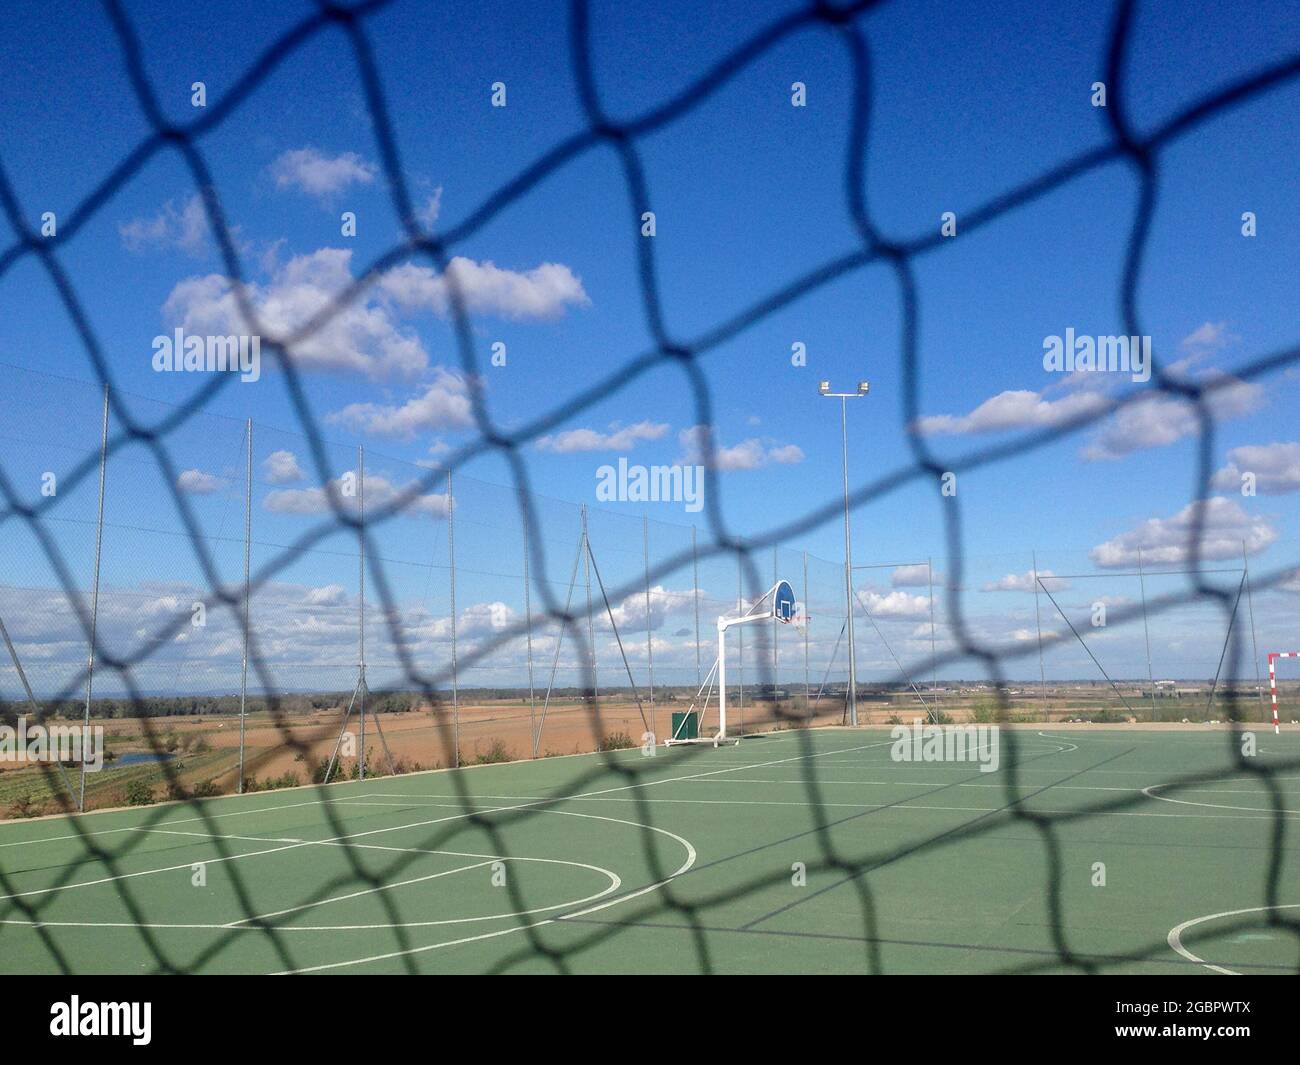 Urban multisports court seen behind safety net. Blue cloudy sky Stock Photo